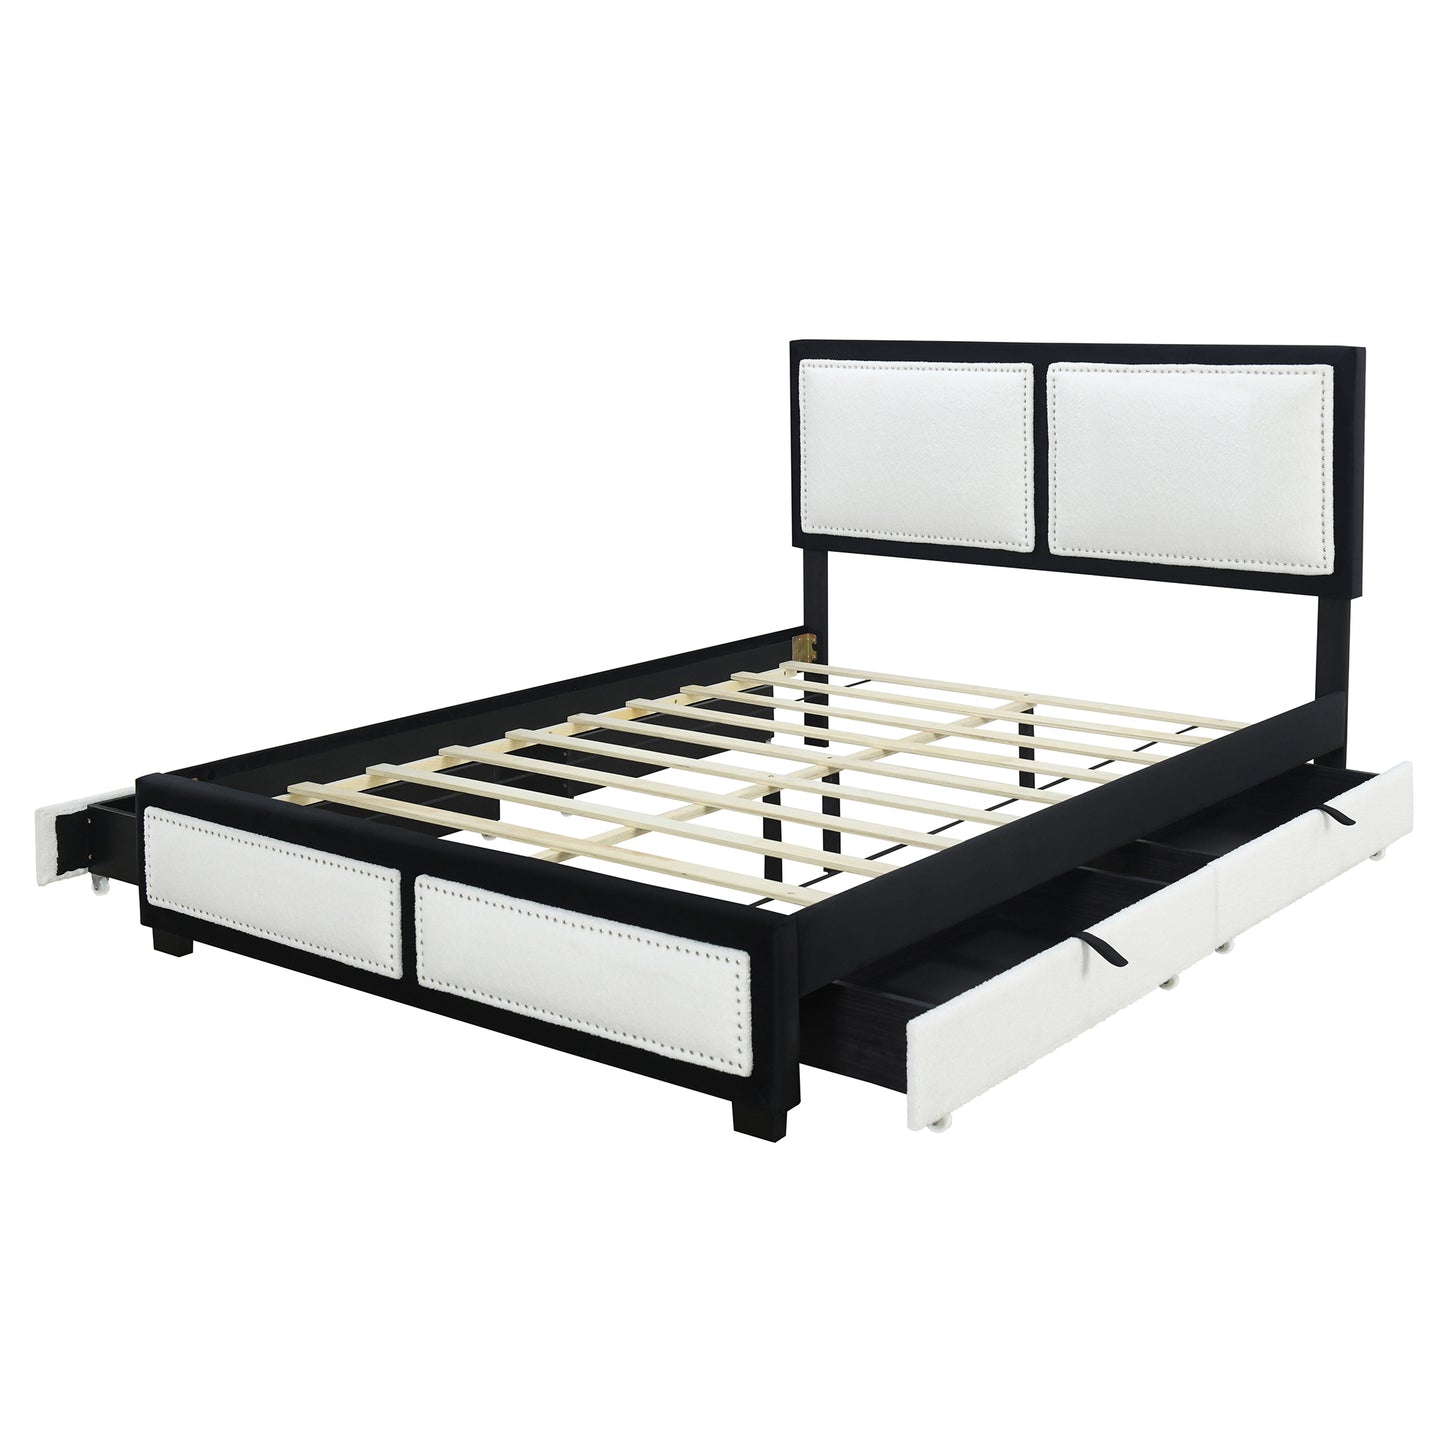 Queen Size Upholstered Platform Bed with Large Rivet-decorated Backrests and 4 Drawers, Velvet matched with Teddy Fleece, Black+White